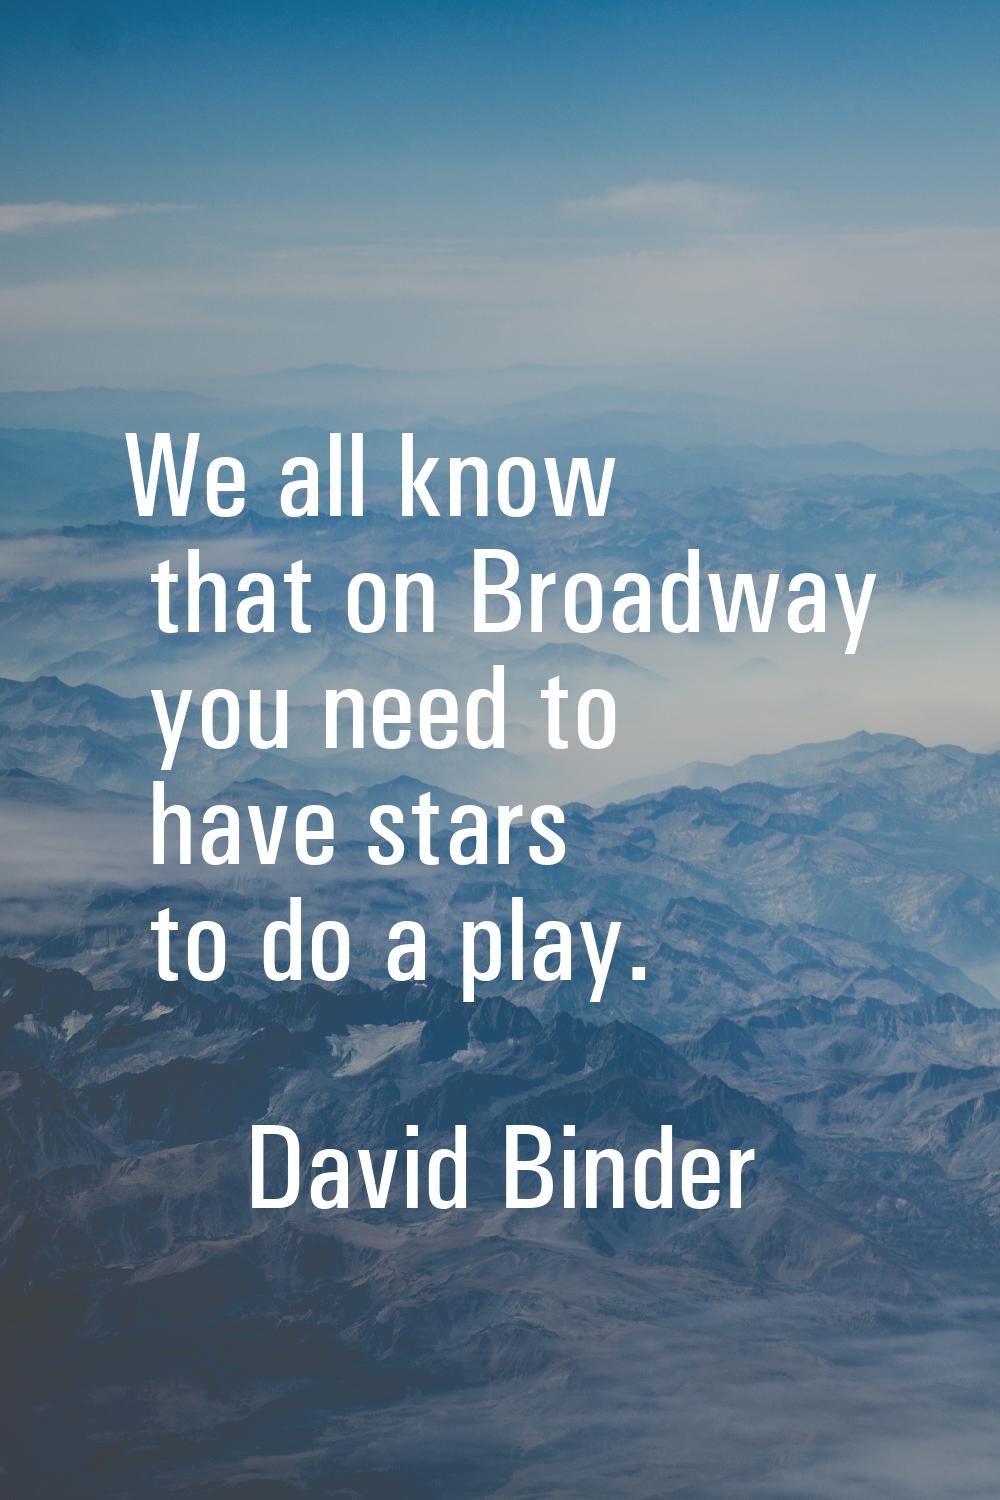 We all know that on Broadway you need to have stars to do a play.